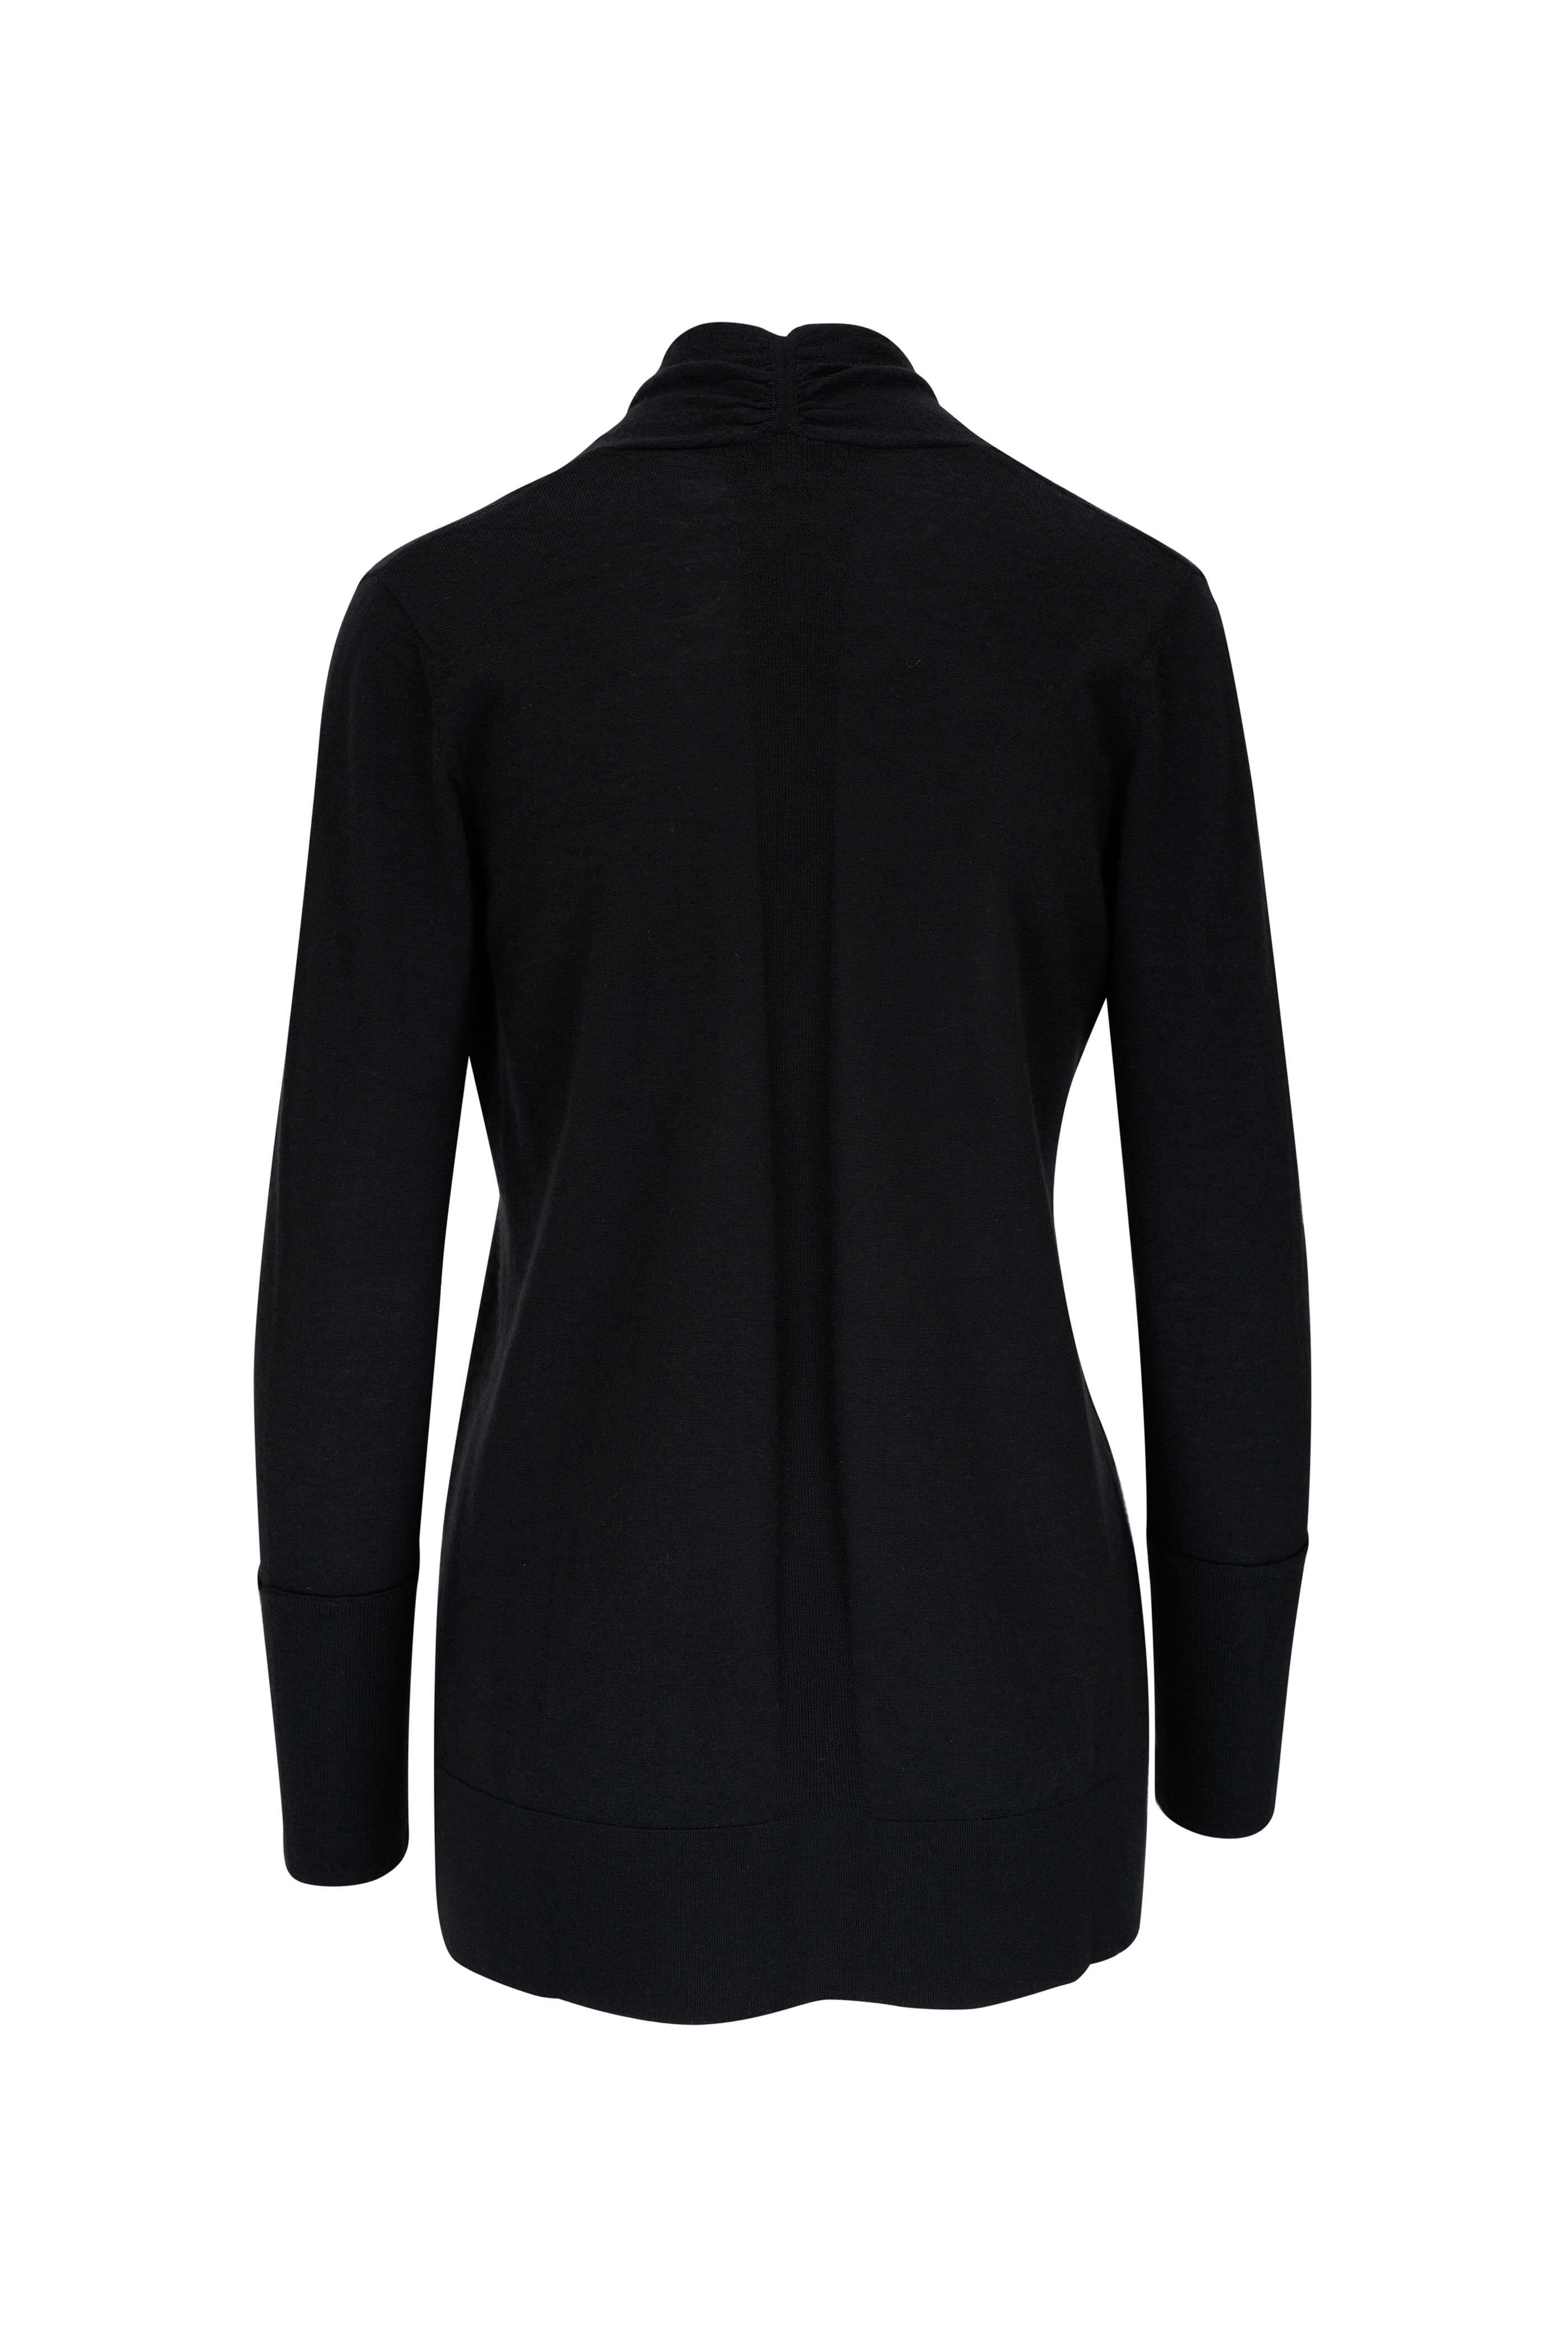 Kinross - Easy Black Worsted Cashmere Cardigan | Mitchell Stores